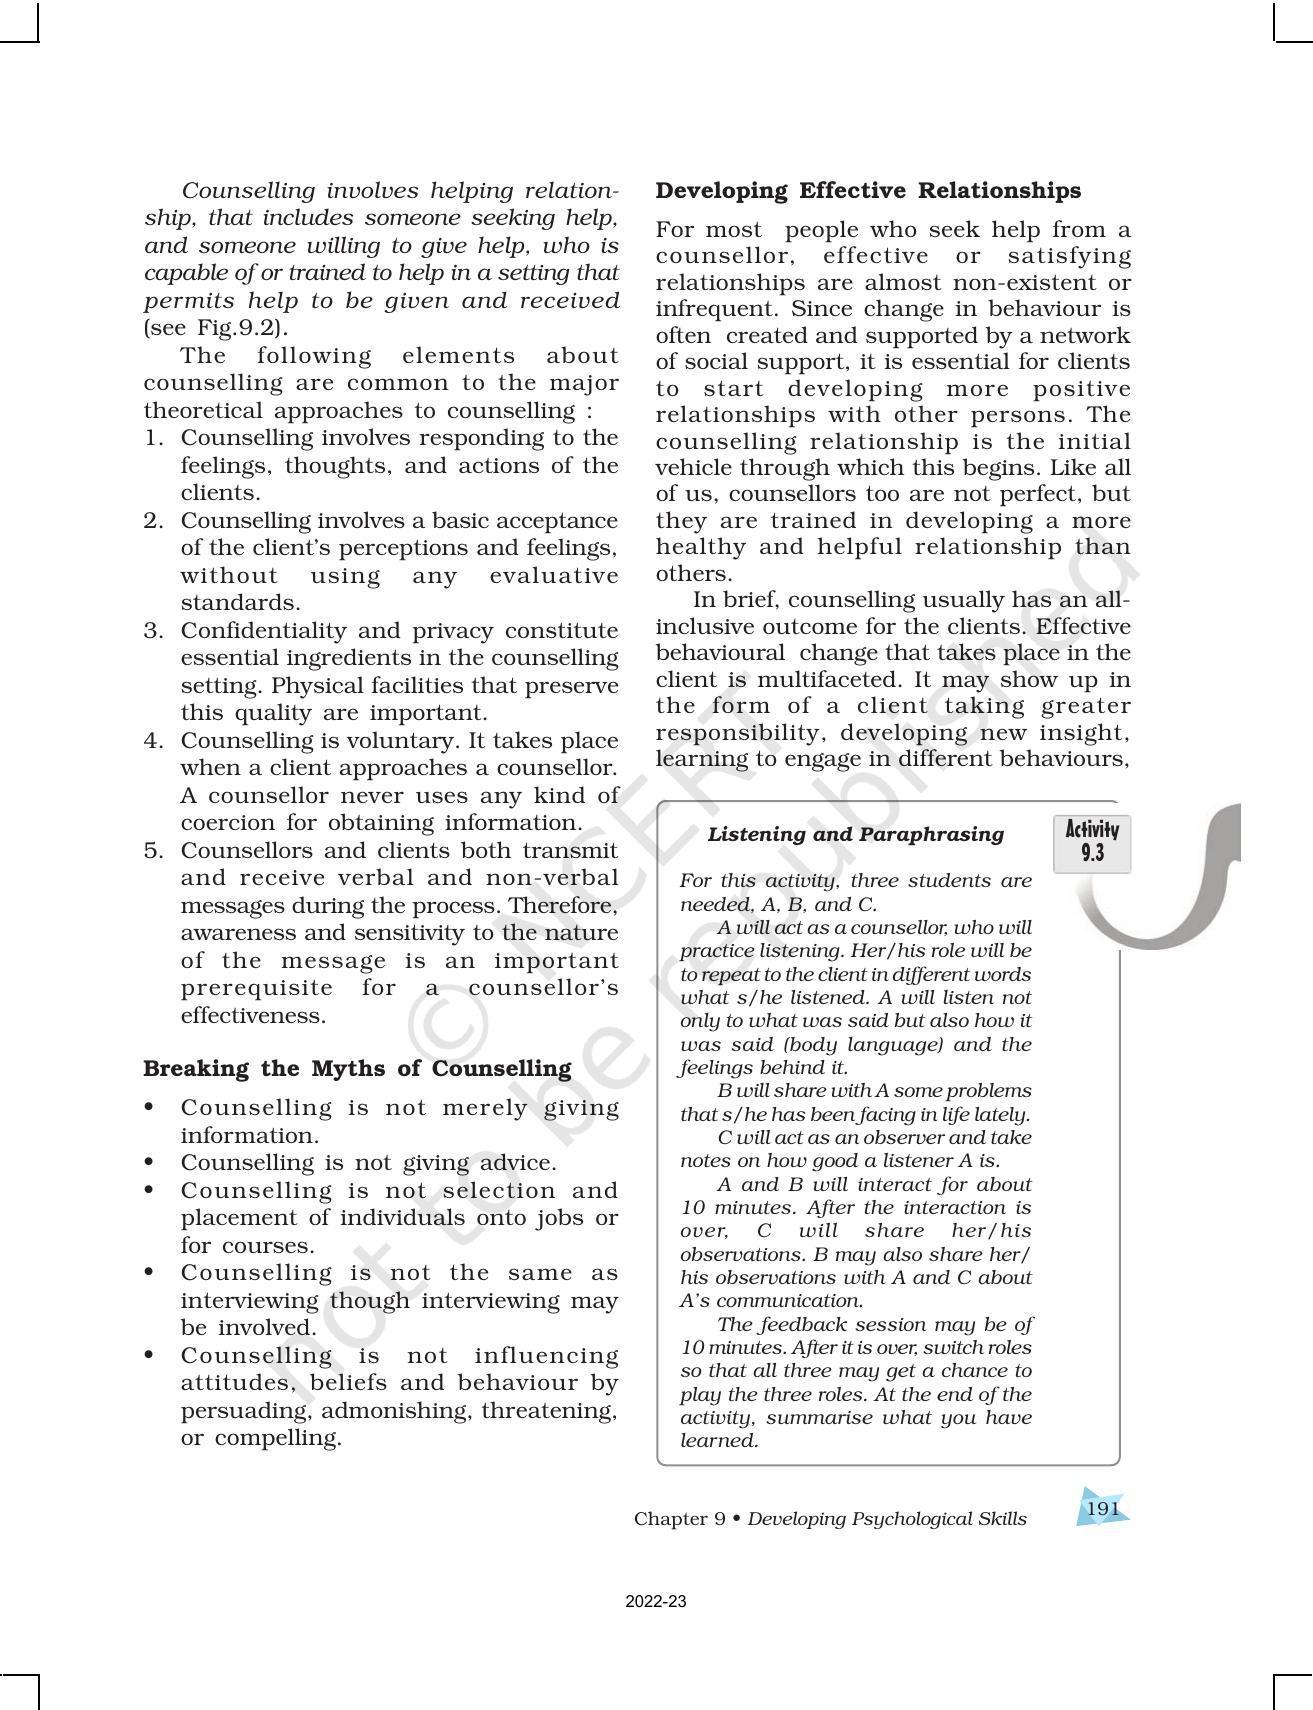 NCERT Book for Class 12 Psychology Chapter 9 Developing Psychological Skills - Page 15